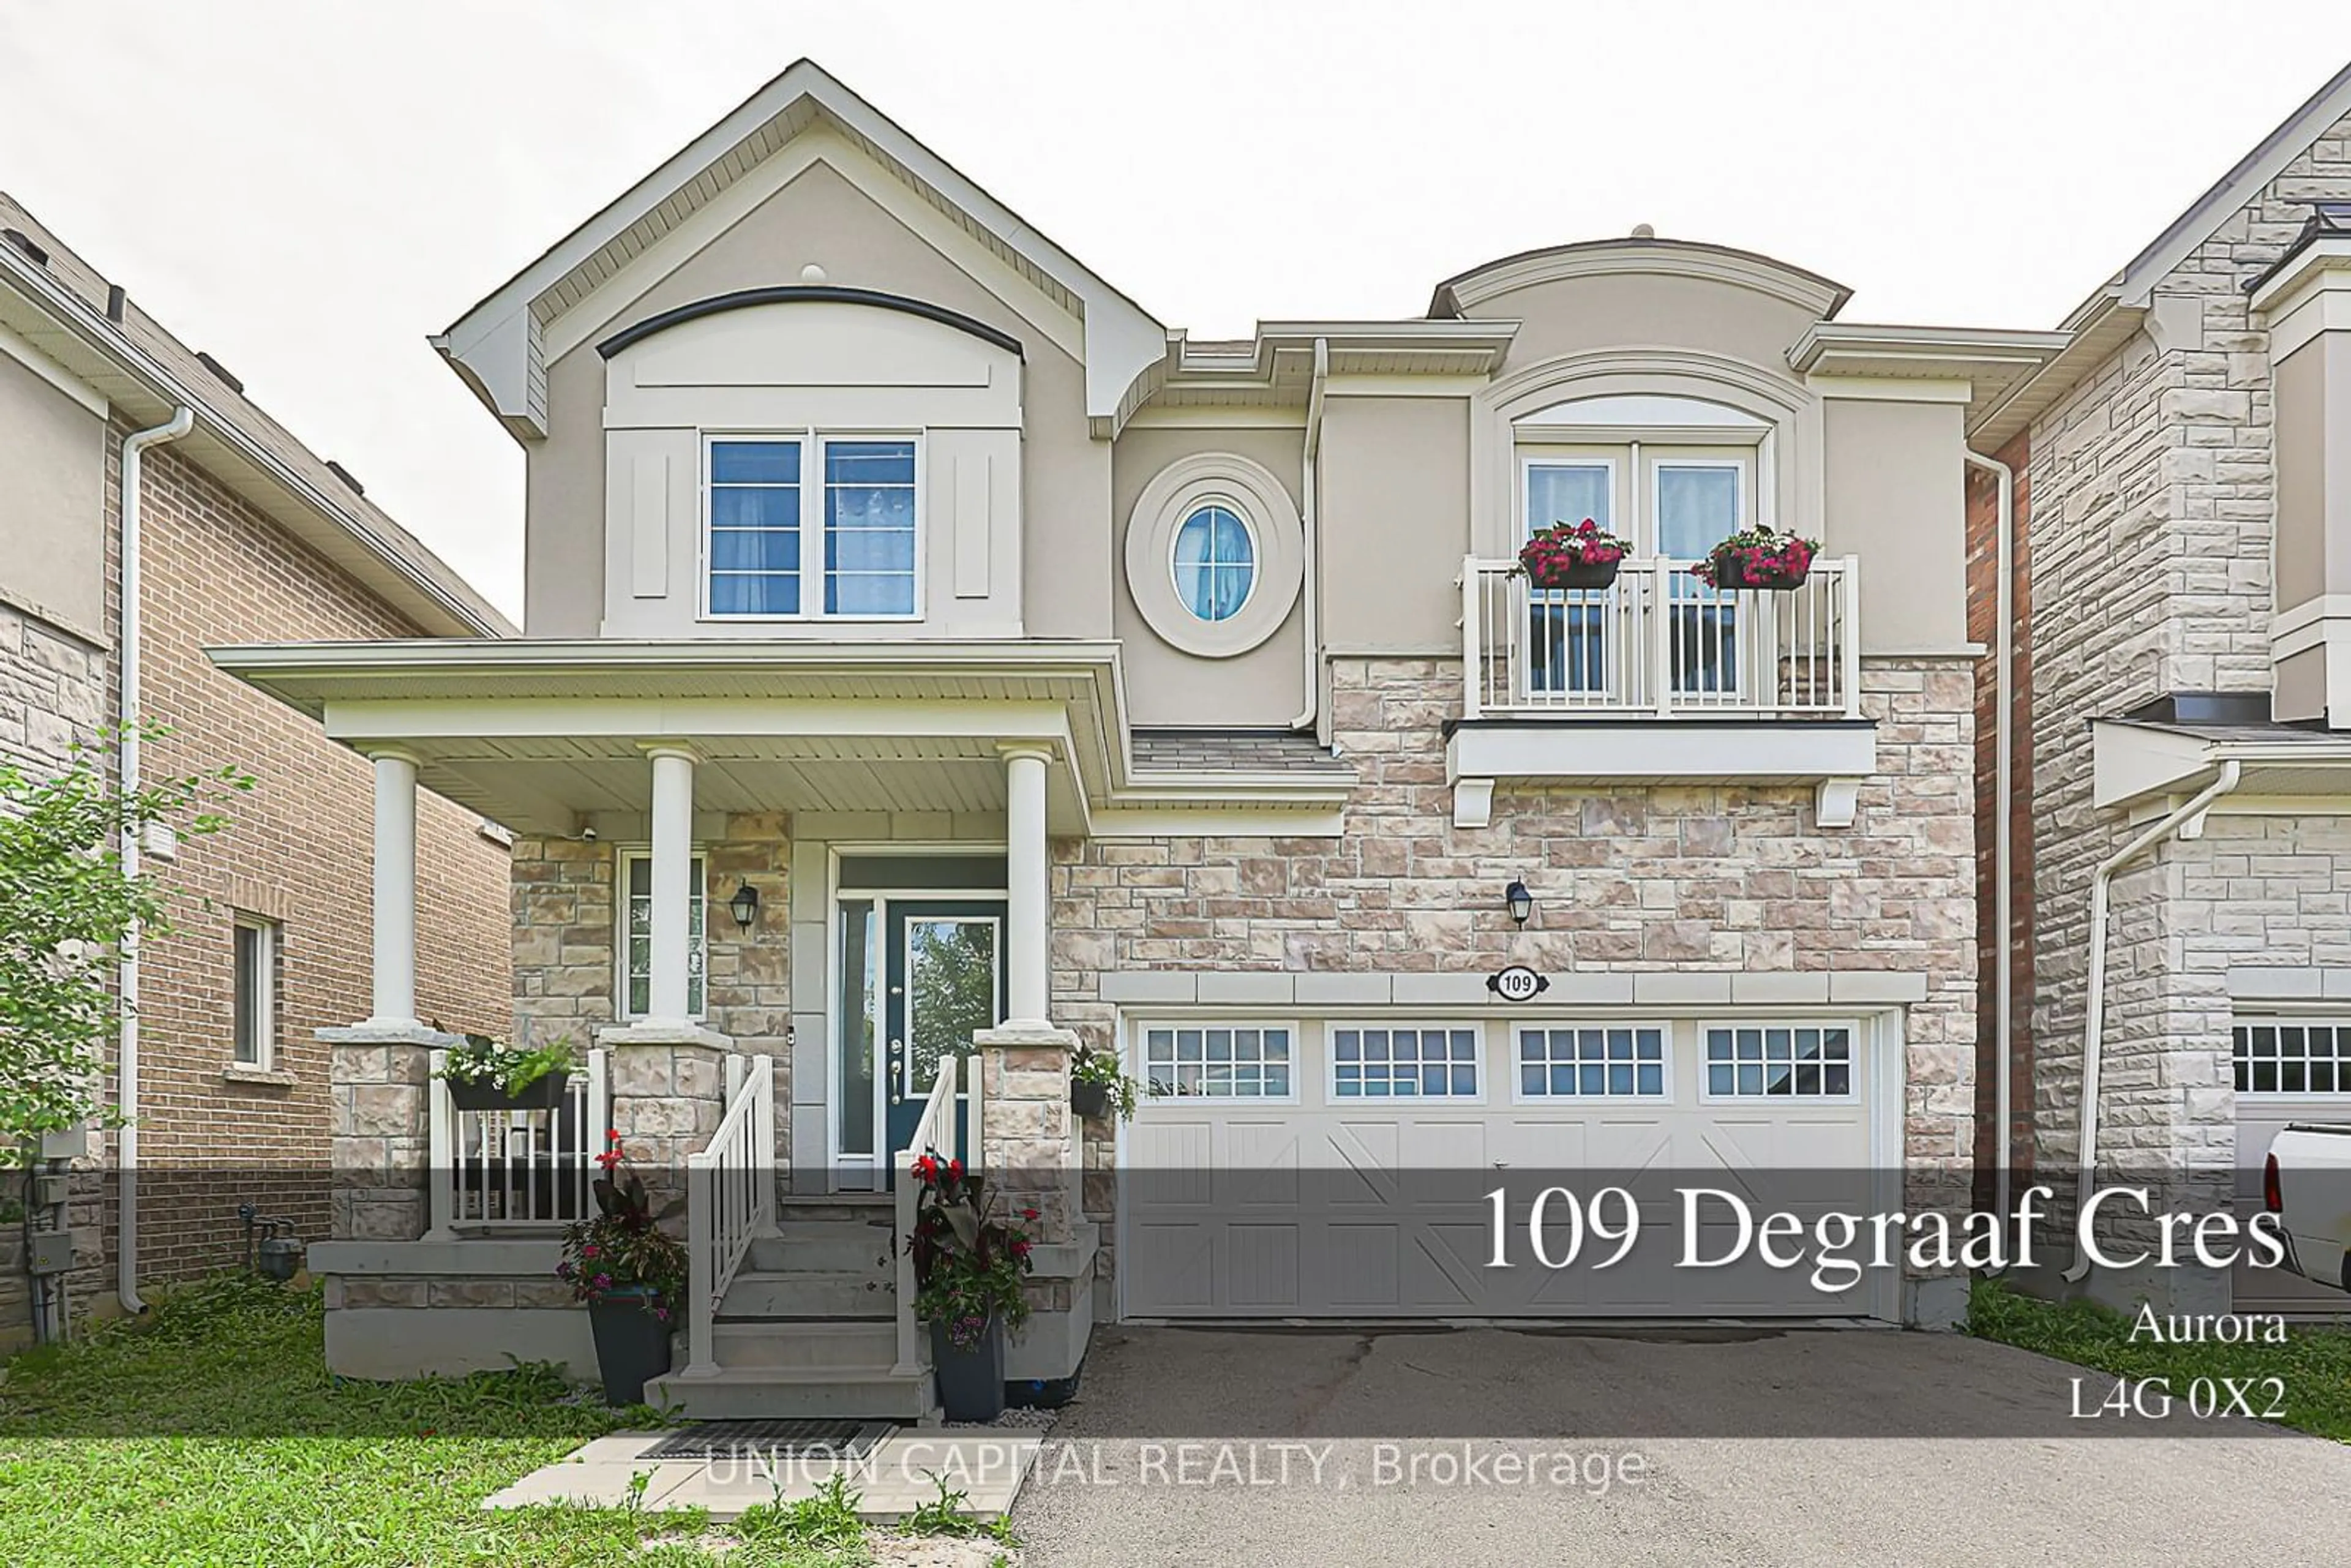 Frontside or backside of a home for 109 Degraaf Cres, Aurora Ontario L4G 0X2